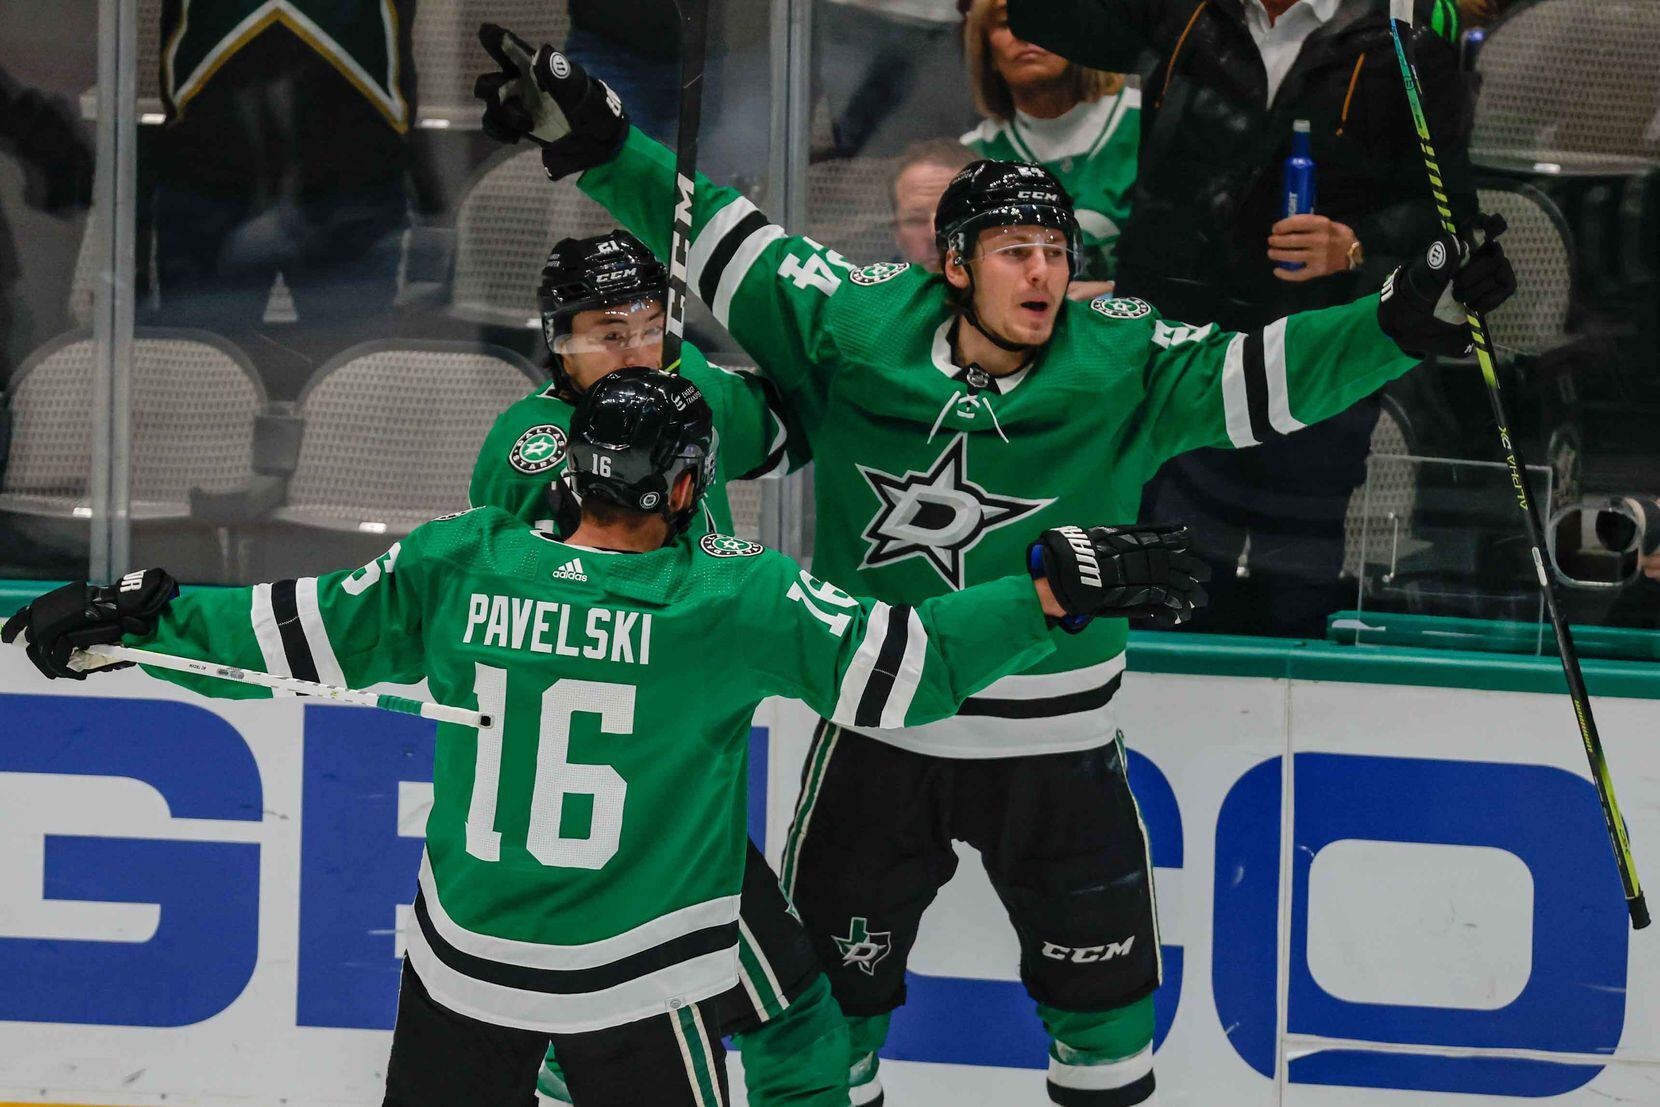 Dallas Stars left wing Roope Hintz (24) celebrates his goal against the Arizona Coyotes with his teammates left wing Jason Robertson (21), center Joe Pavelski (16) during first period at the American Airlines Center in Dallas on Monday, December 6, 2021. (Lola Gomez/The Dallas Morning News)